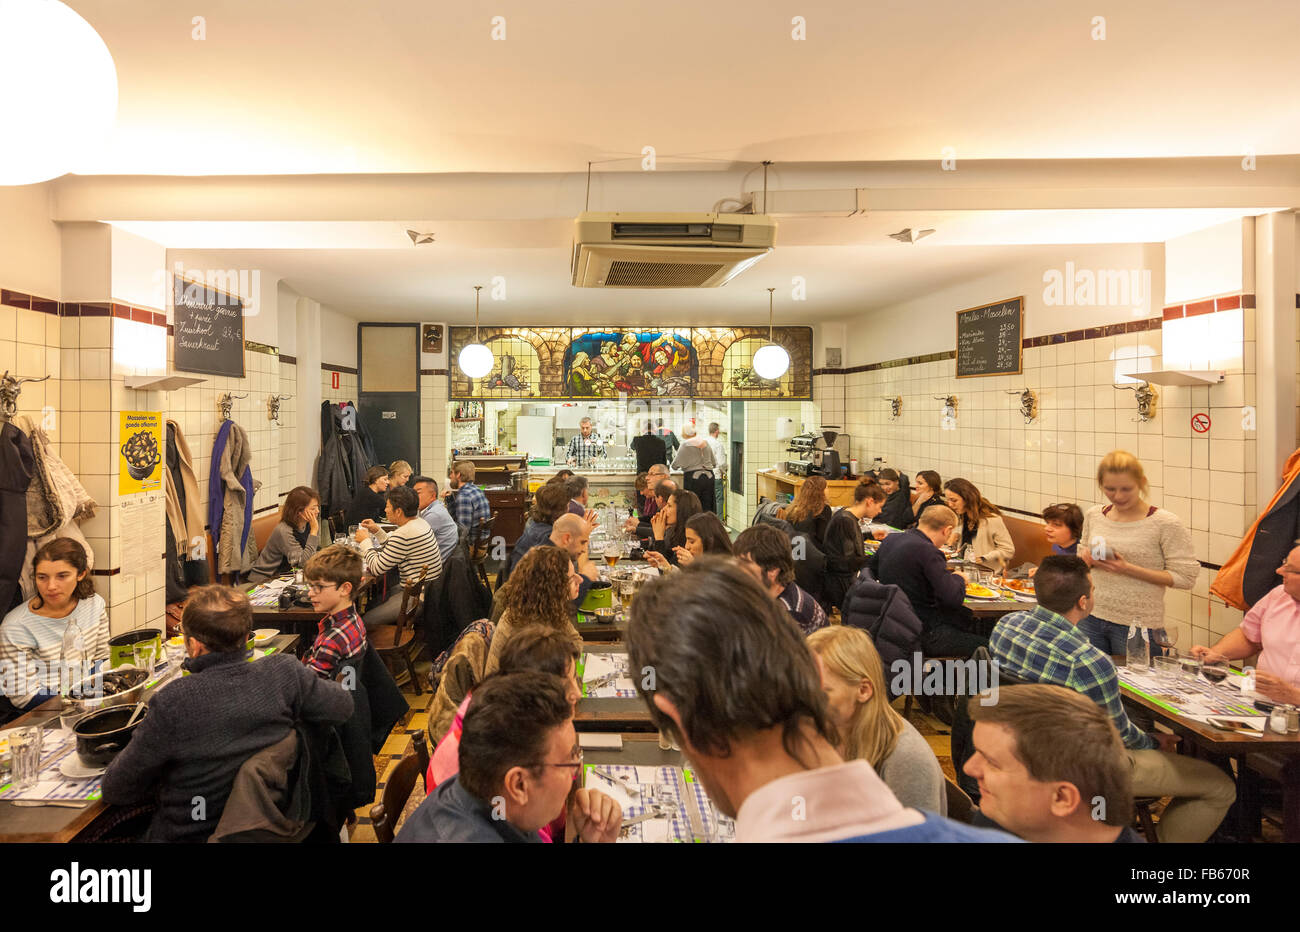 Brussels Restaurant Le Pré Salé interior with people eating mussels fries chips moules frites and other traditional Belgian food Stock Photo